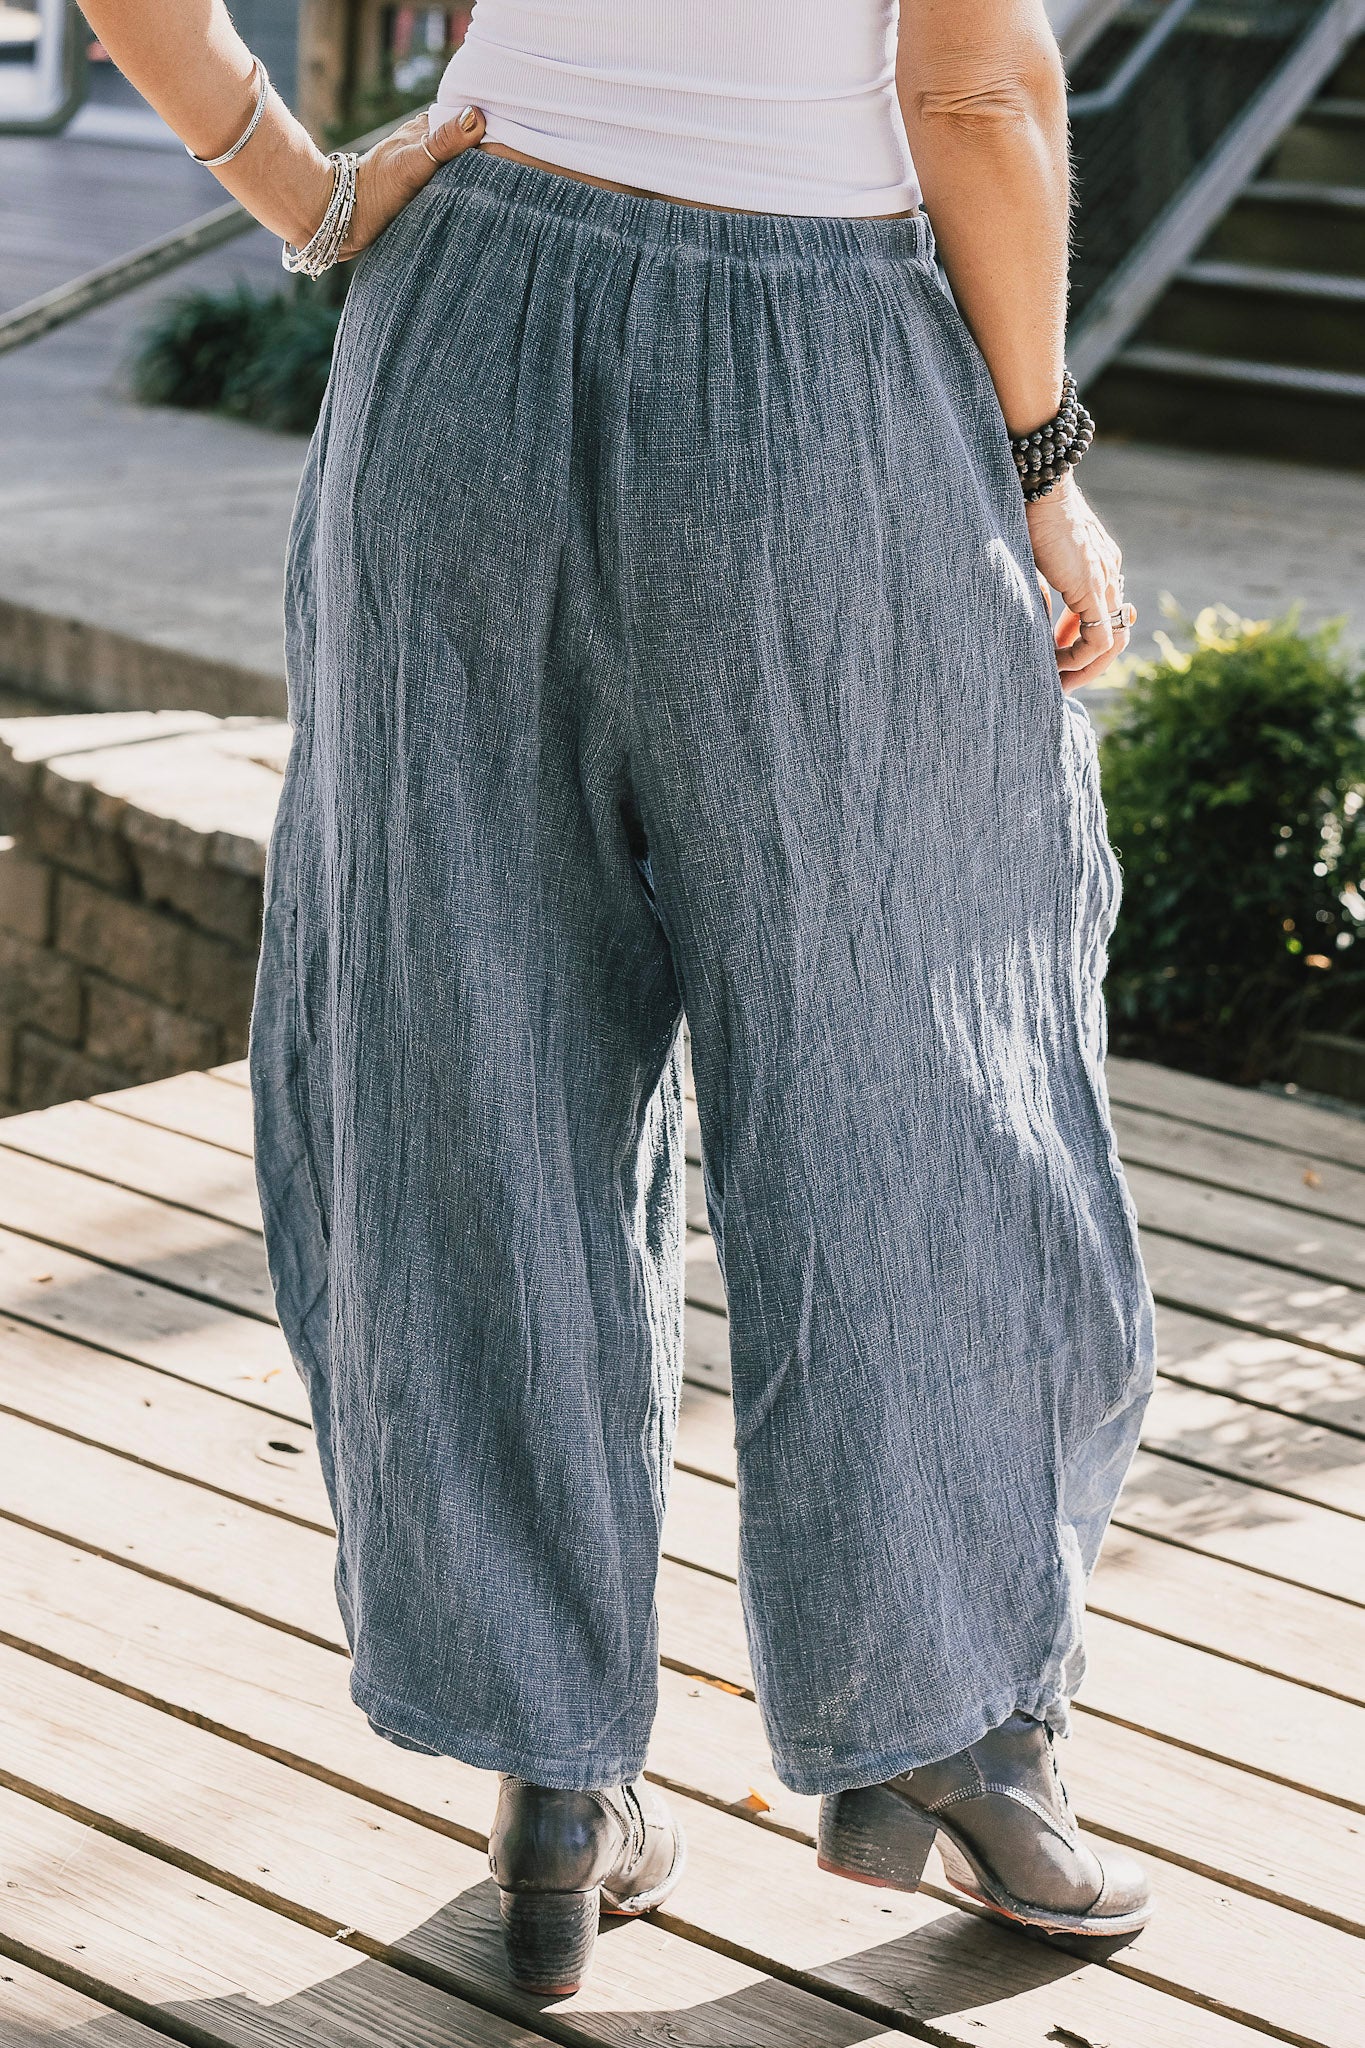 The Hendrix Pants in Navy - SpiritedBoutiques Boho Hippie Boutique Style Pants, Meo Meli